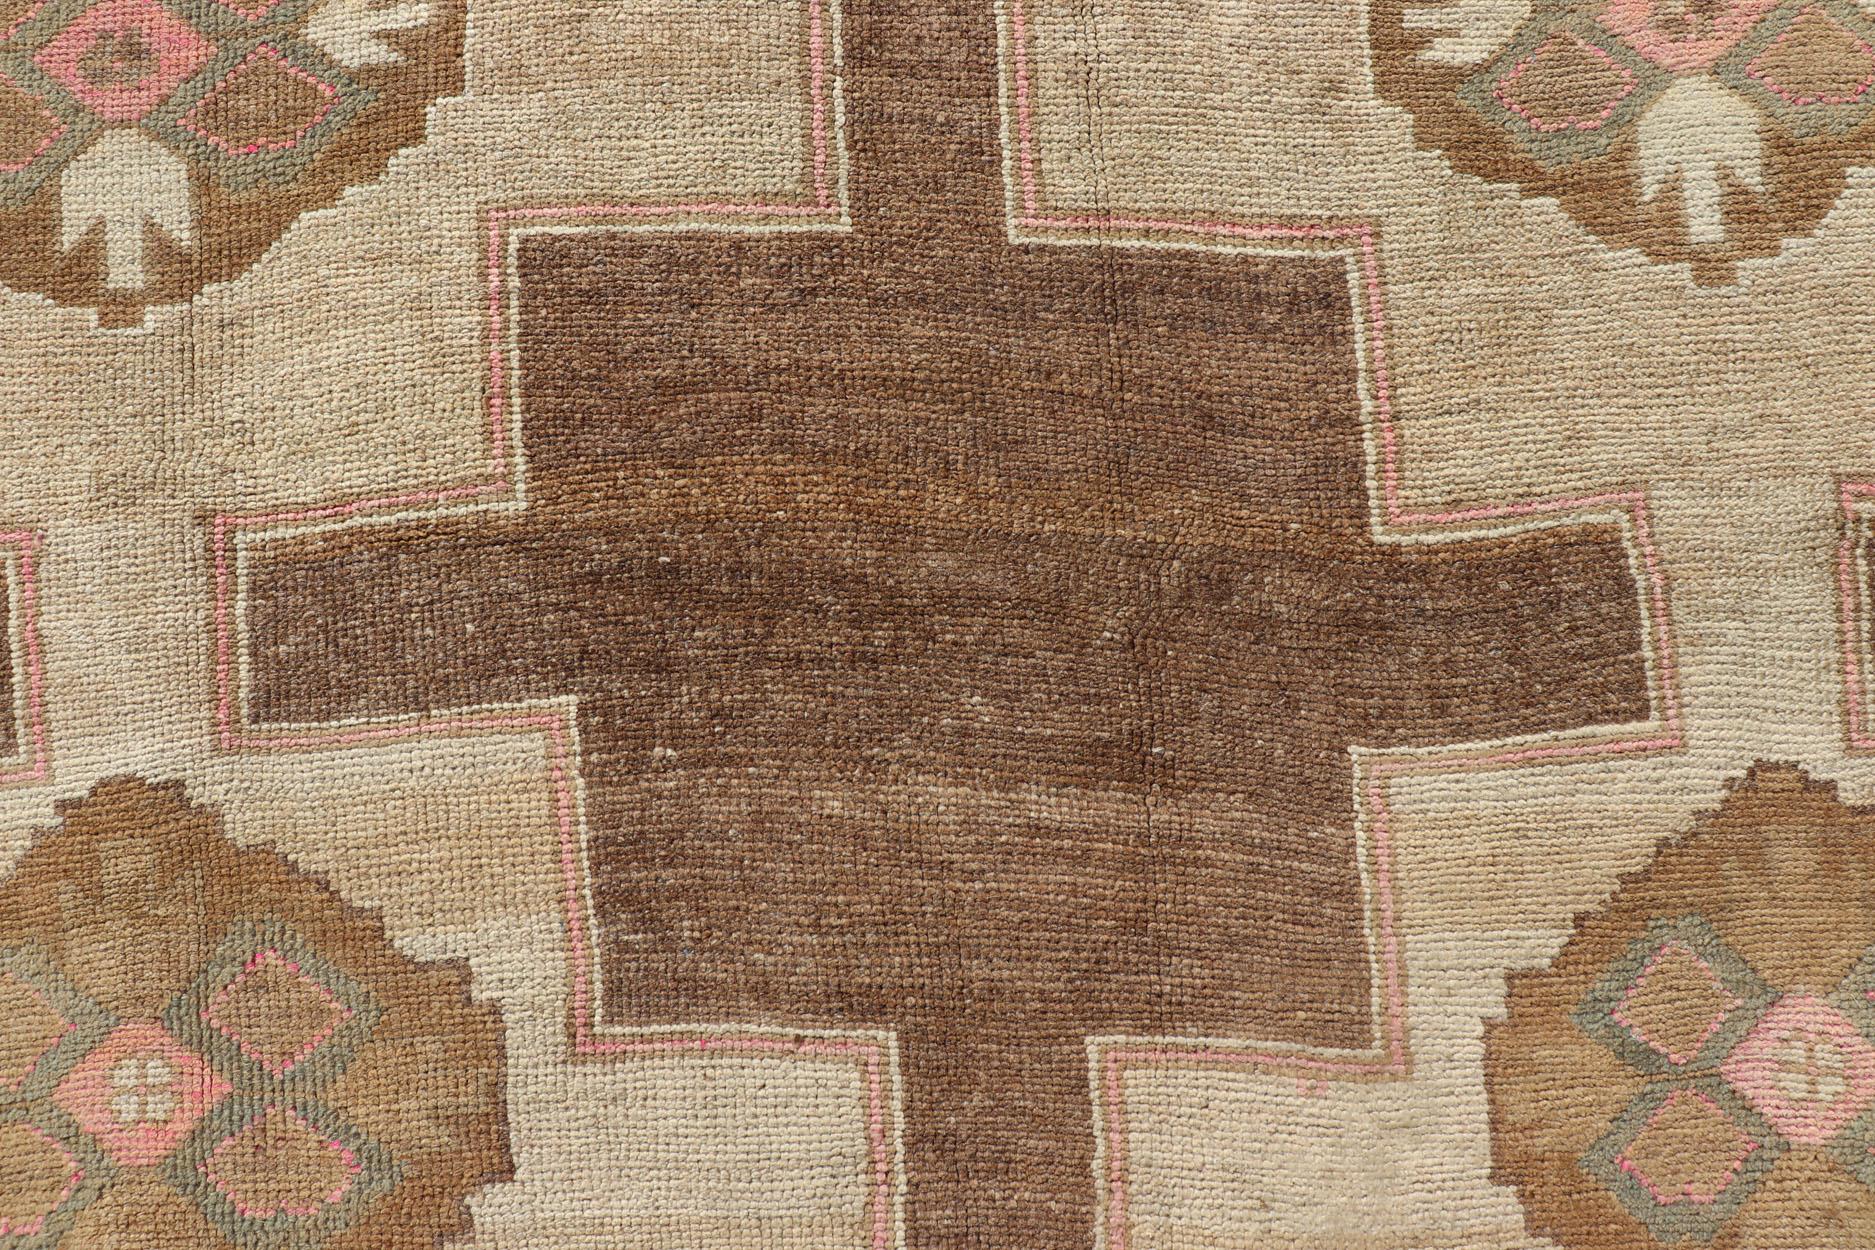 Vintage Kars Wide Gallery Rug in Brown Colors, Tan, Taupe and Light Green For Sale 5